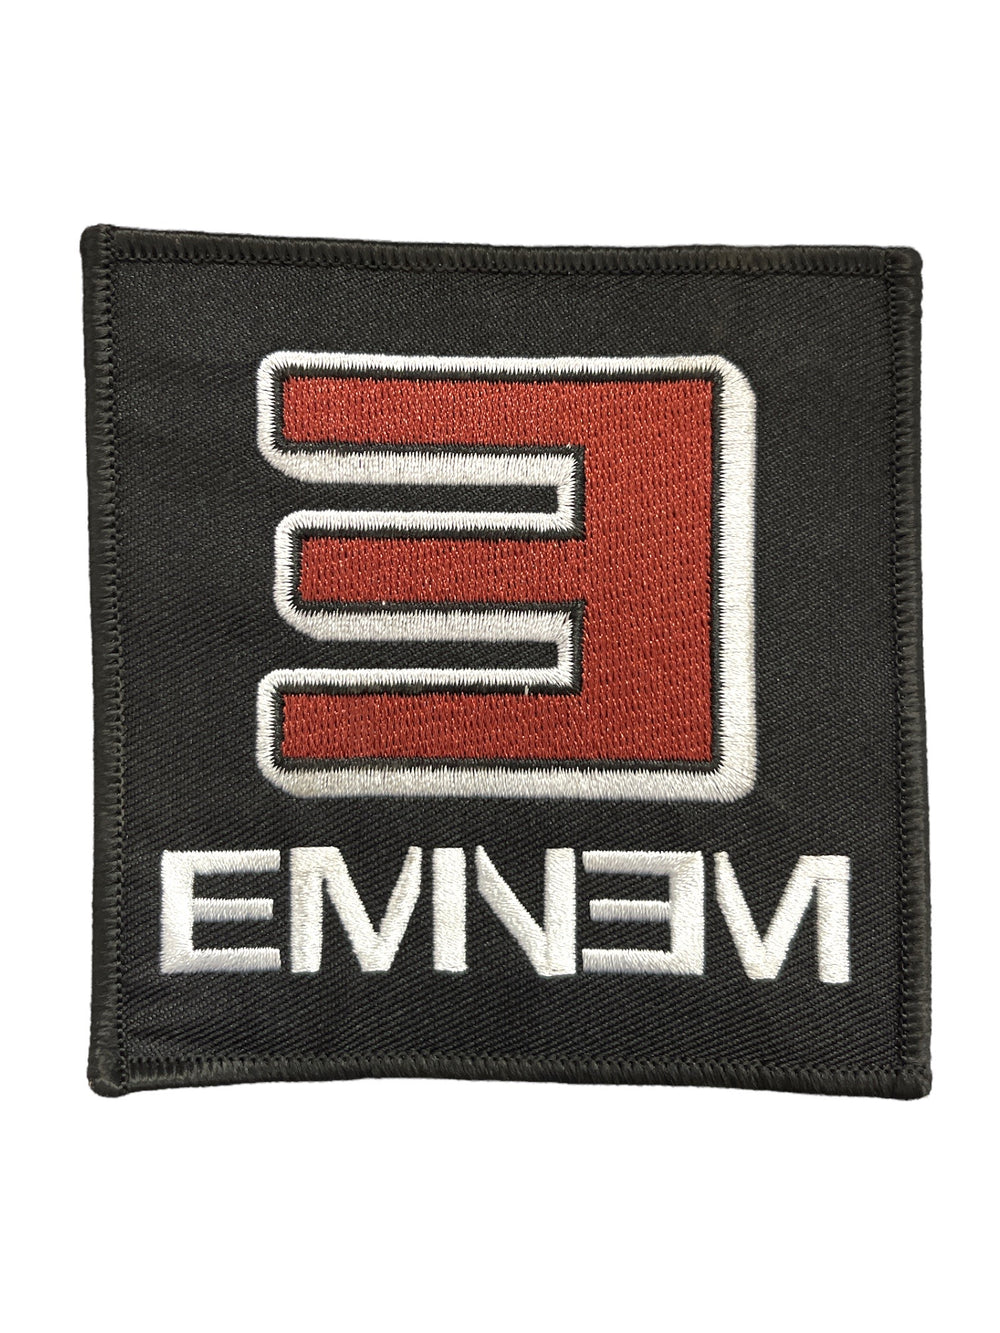 Eminem Reverse E Official Woven Patch Brand New